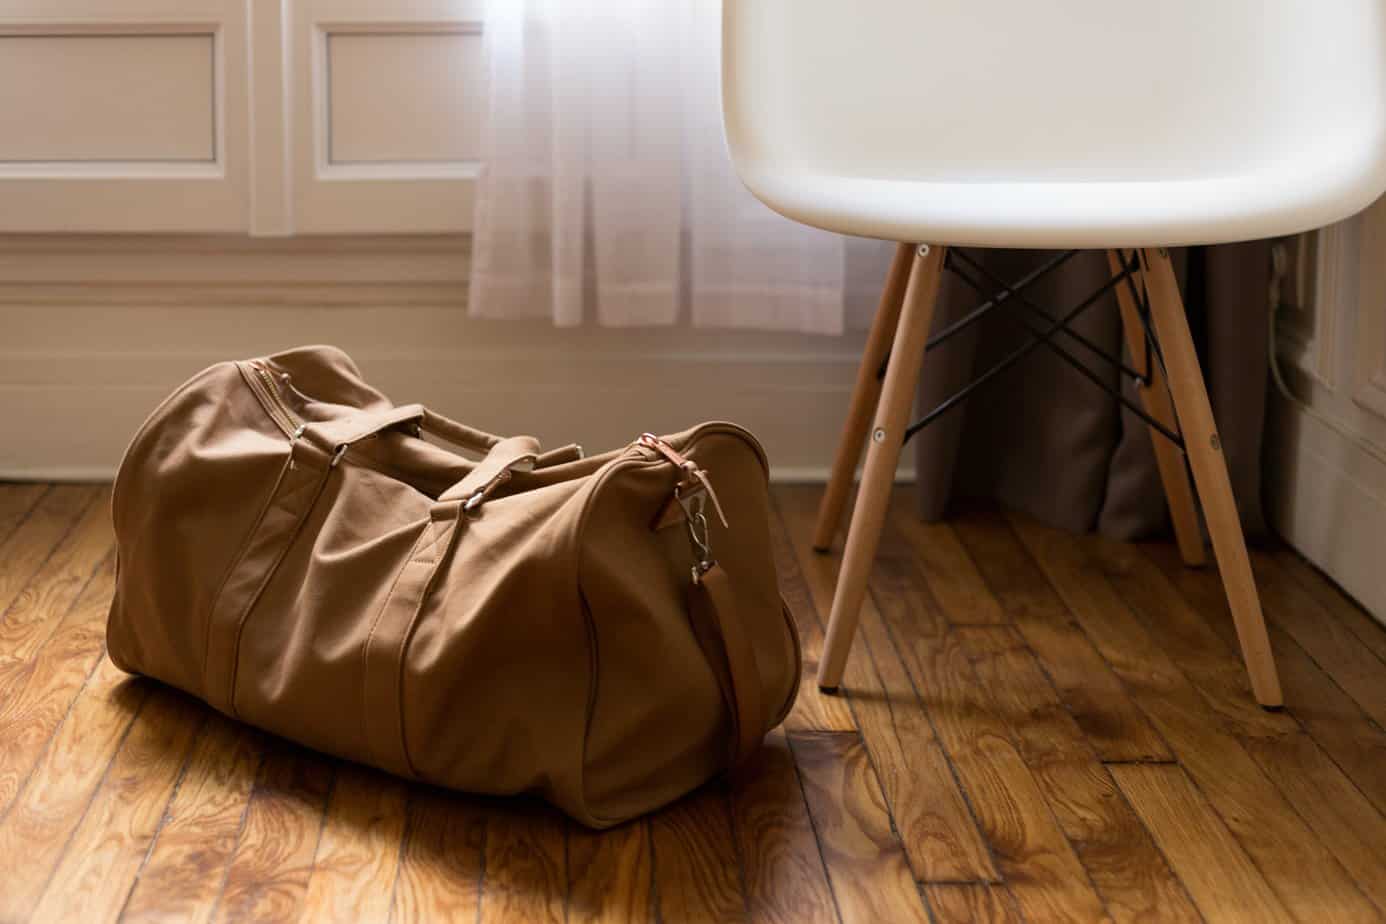 A packed duffle bag on a wooden floor.